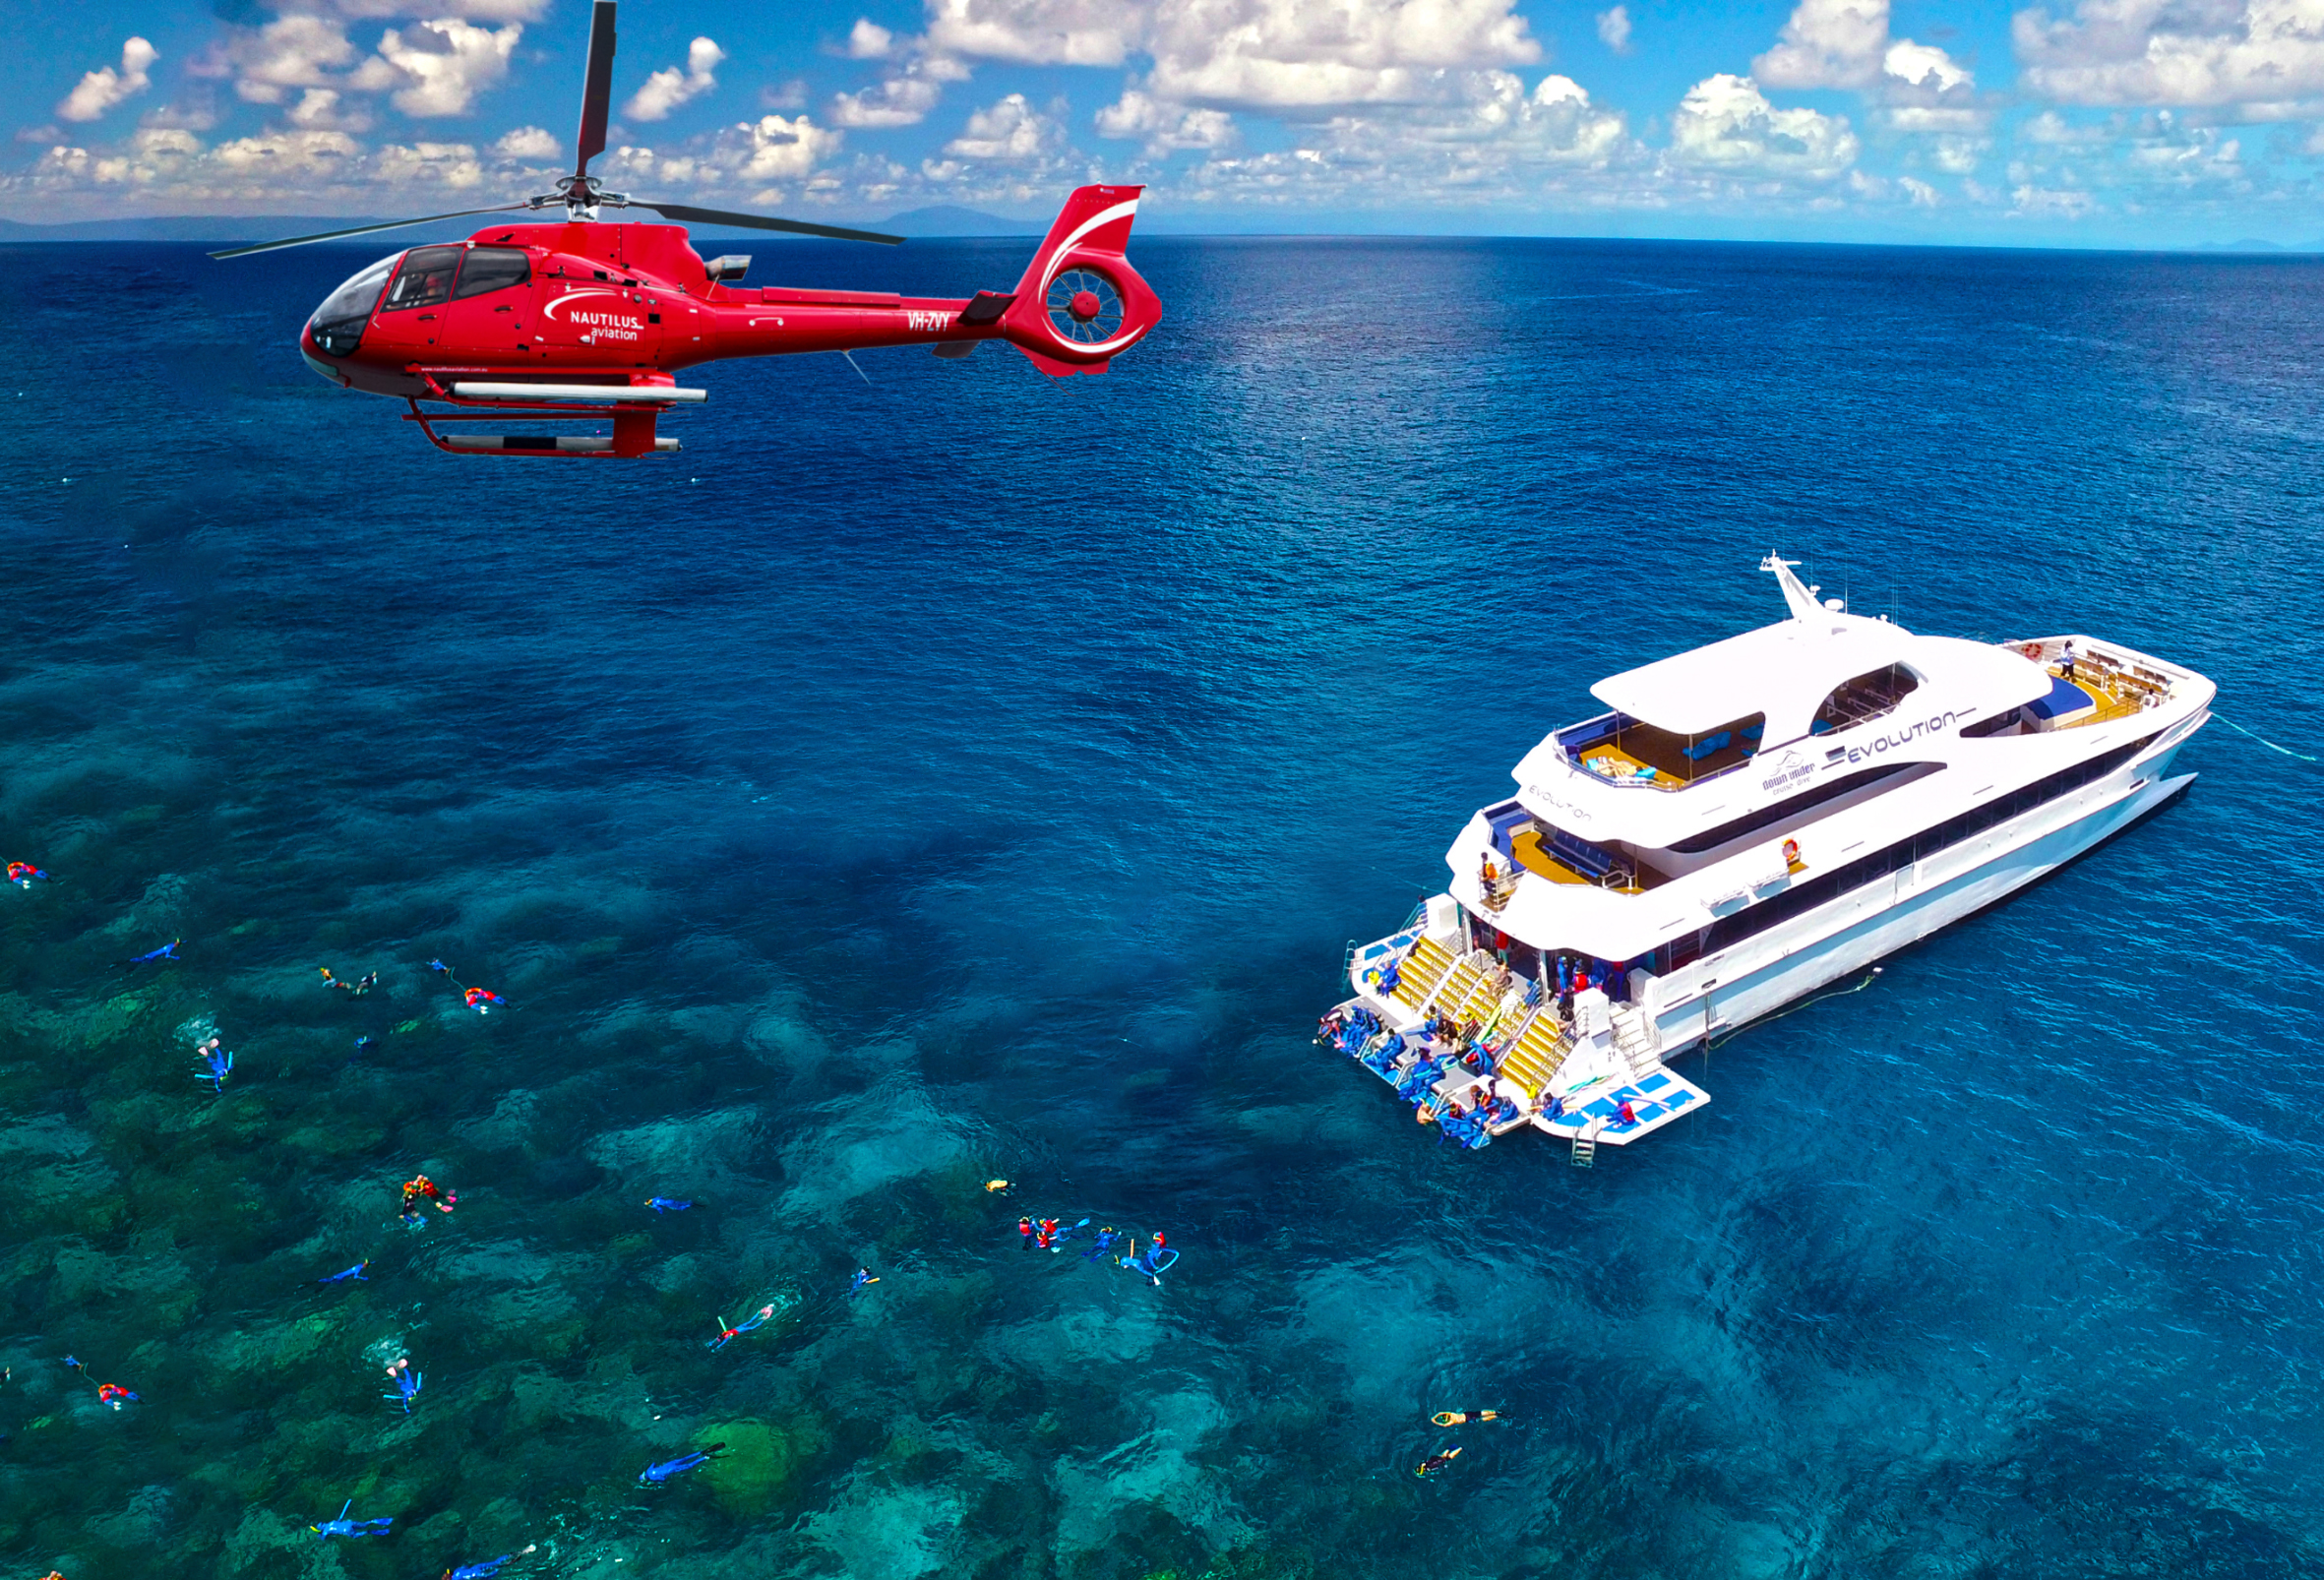 Great Barrier Reef Scenic Flight and Cruise tile image